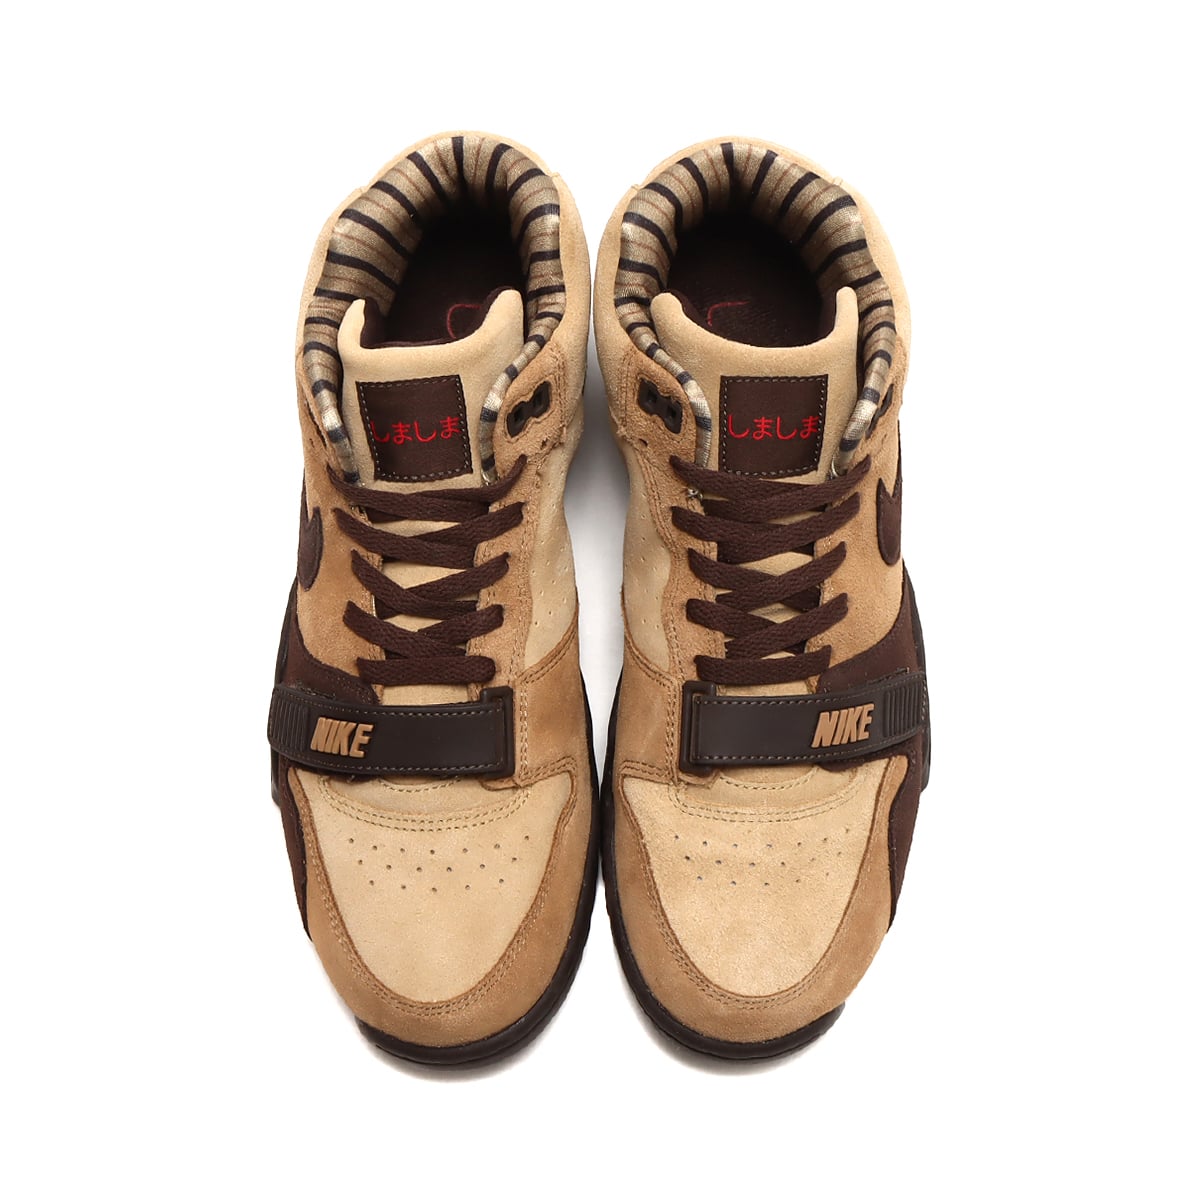 NIKE AIR TRAINER 1 HAY/BAROQUE BROWN-TAUPE-VARSITY RED 22HO-I